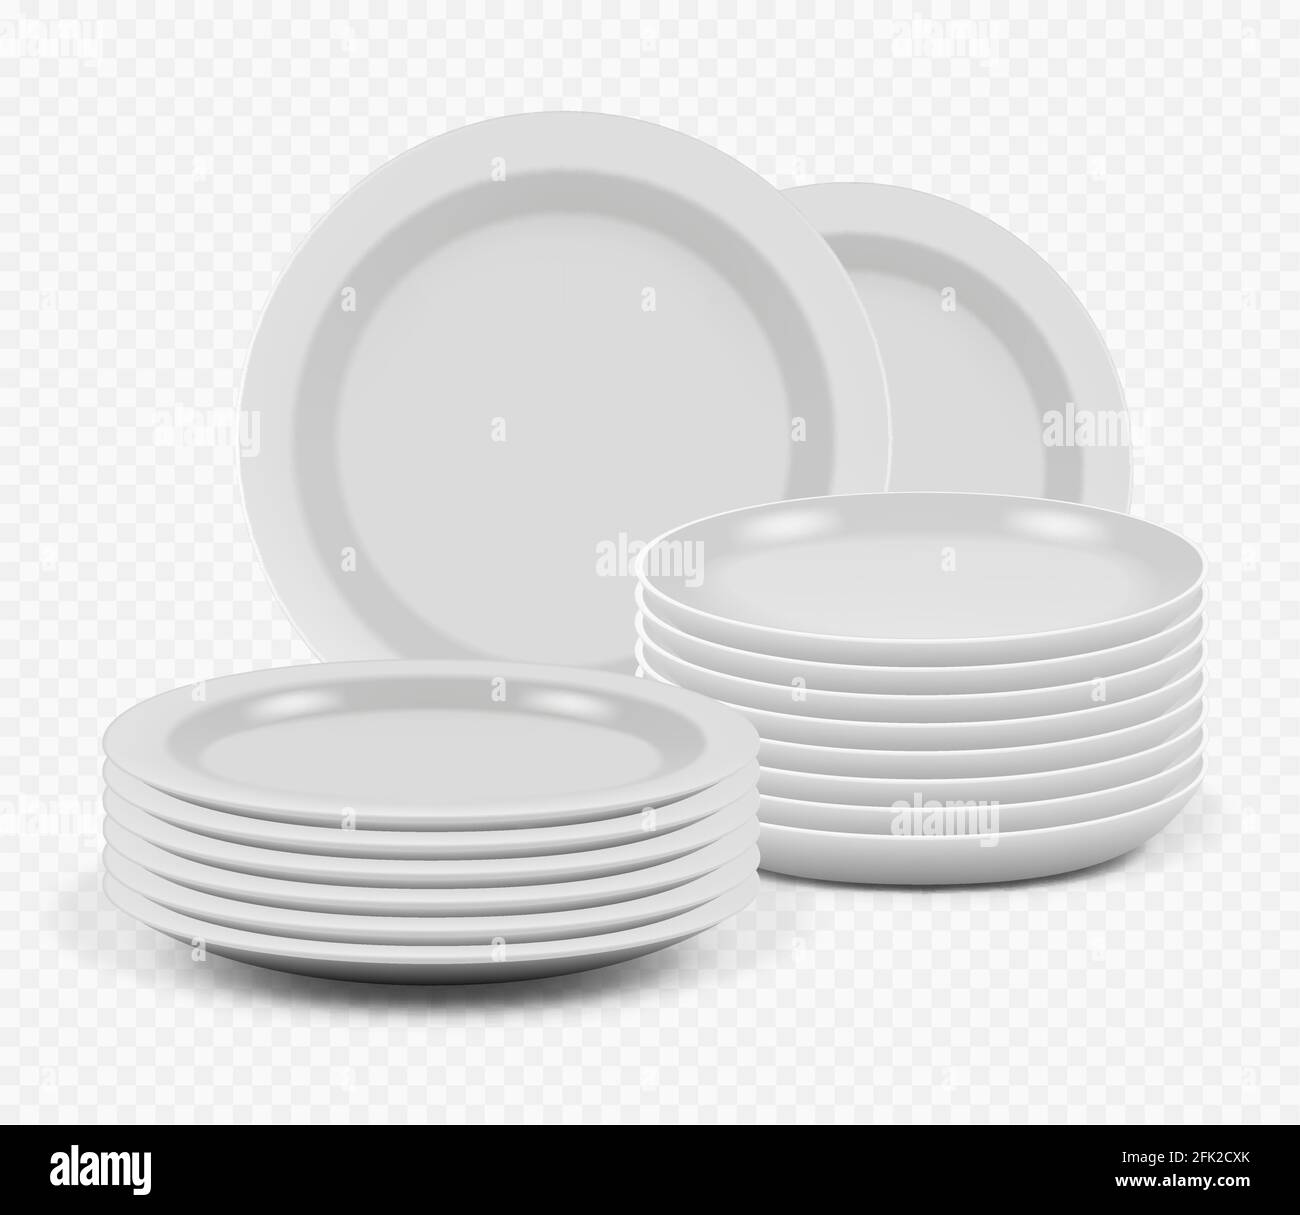 Stack plates. Kitchenware ceramic dishes for cooking mockup plates and bowls vector realistic Stock Vector